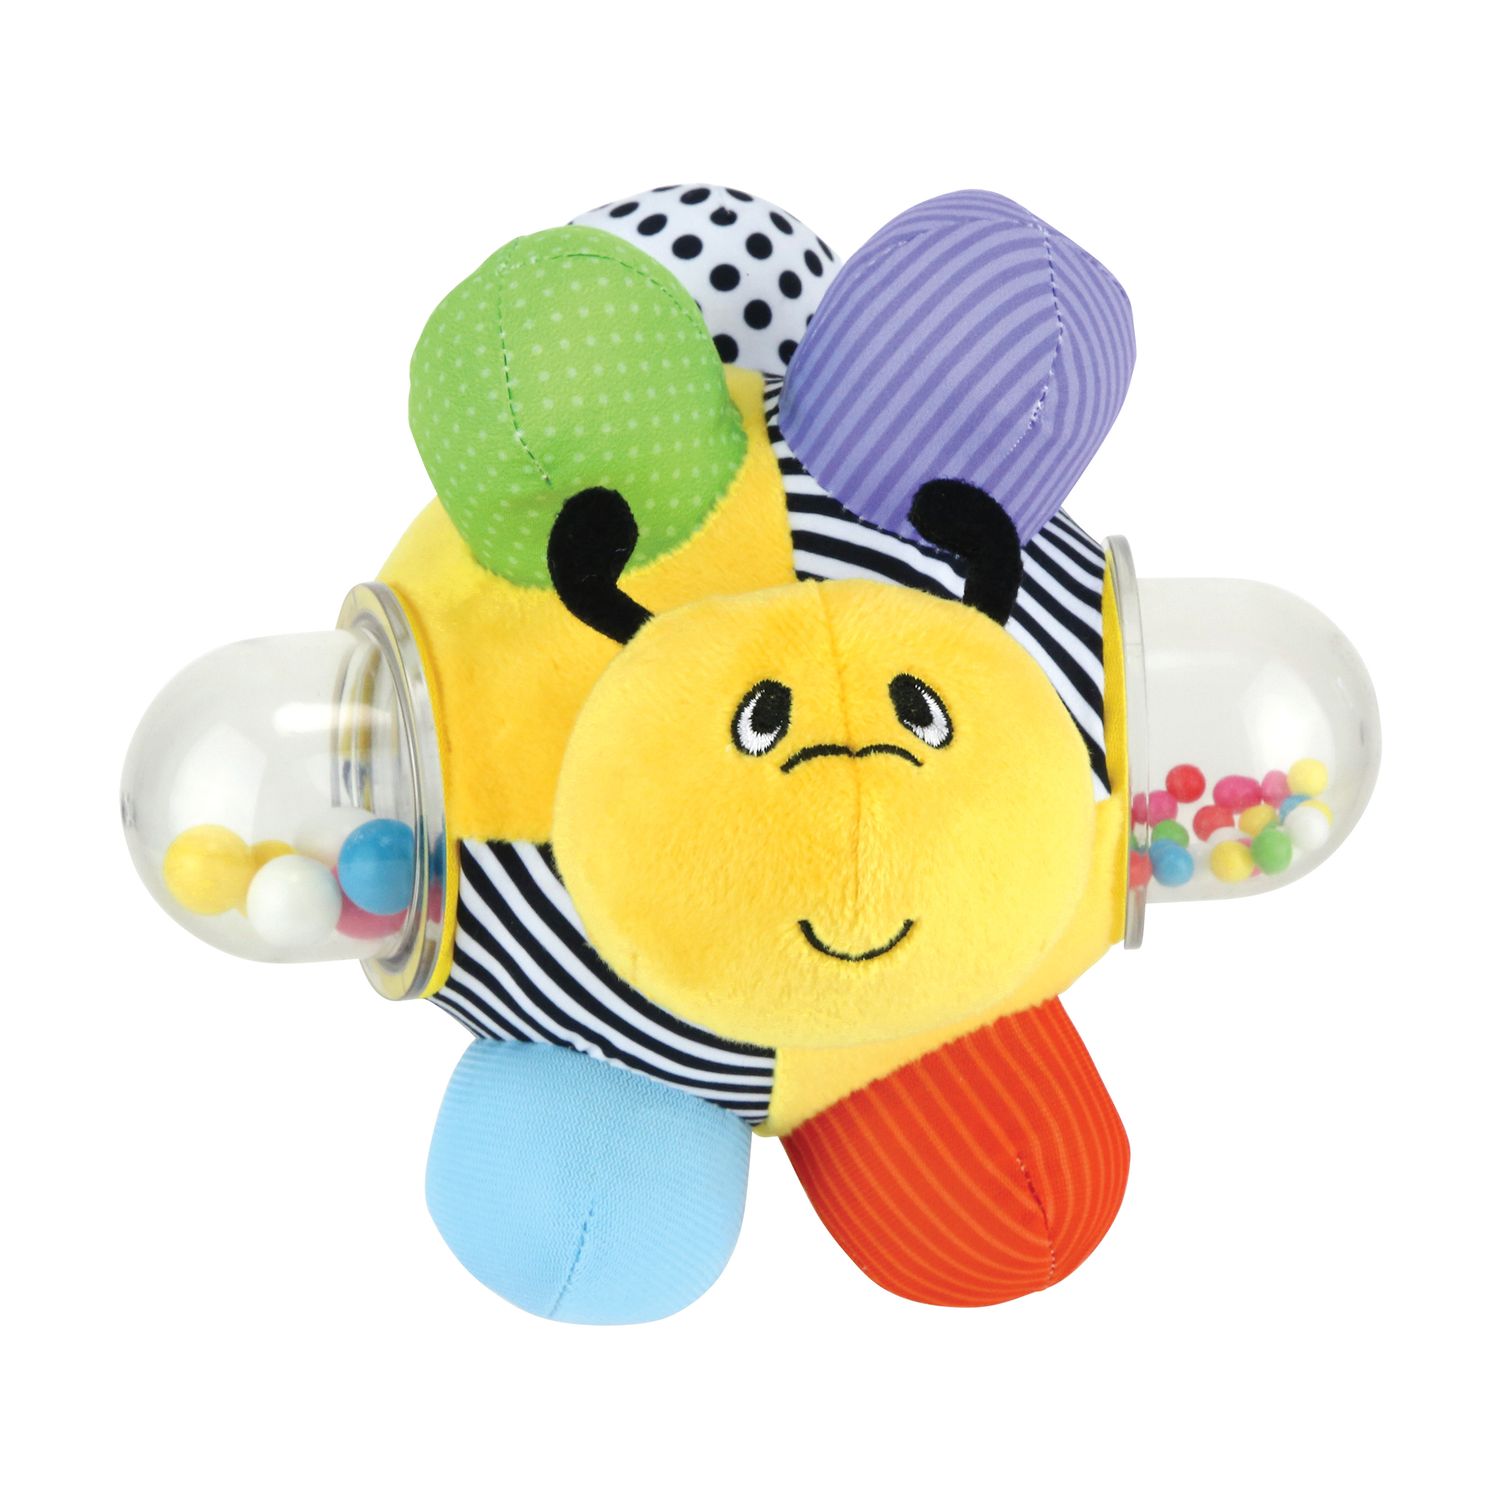 bumble ball toy for babies